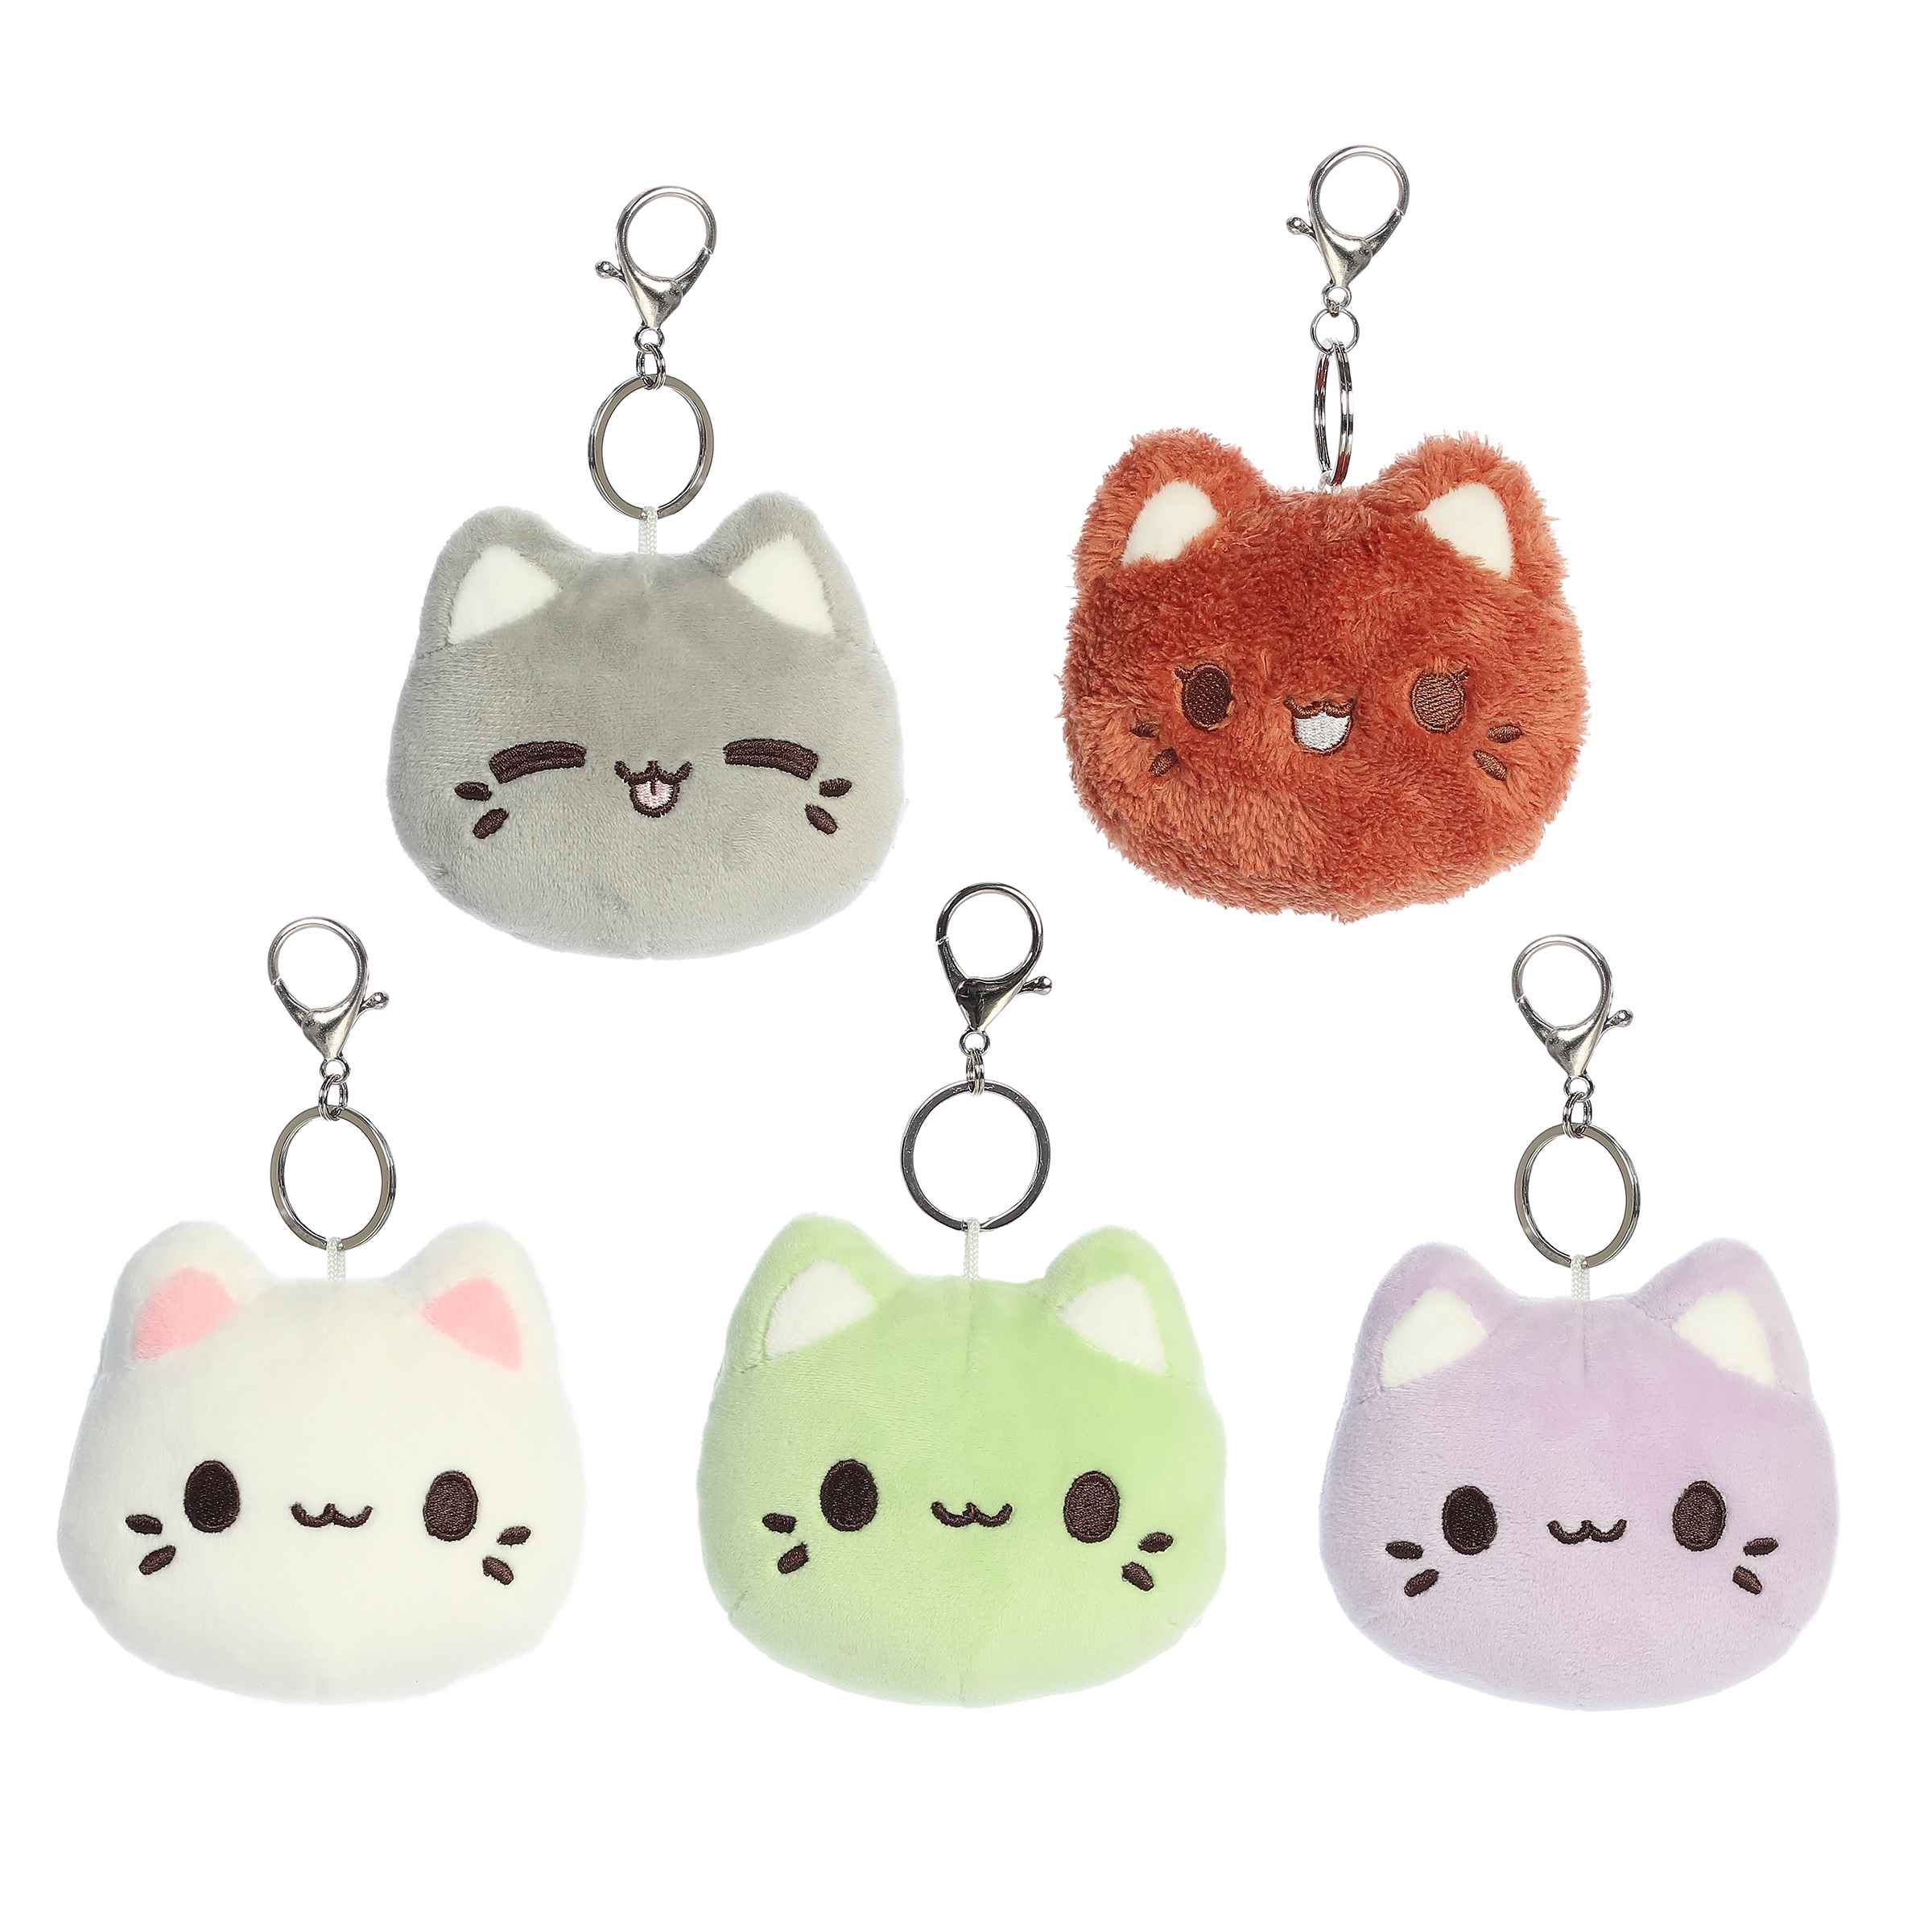 Meowchi Face Blind Bag Keychains from Tasty Peach, assorted flavors like Green Tea and Taro, on a small keychain